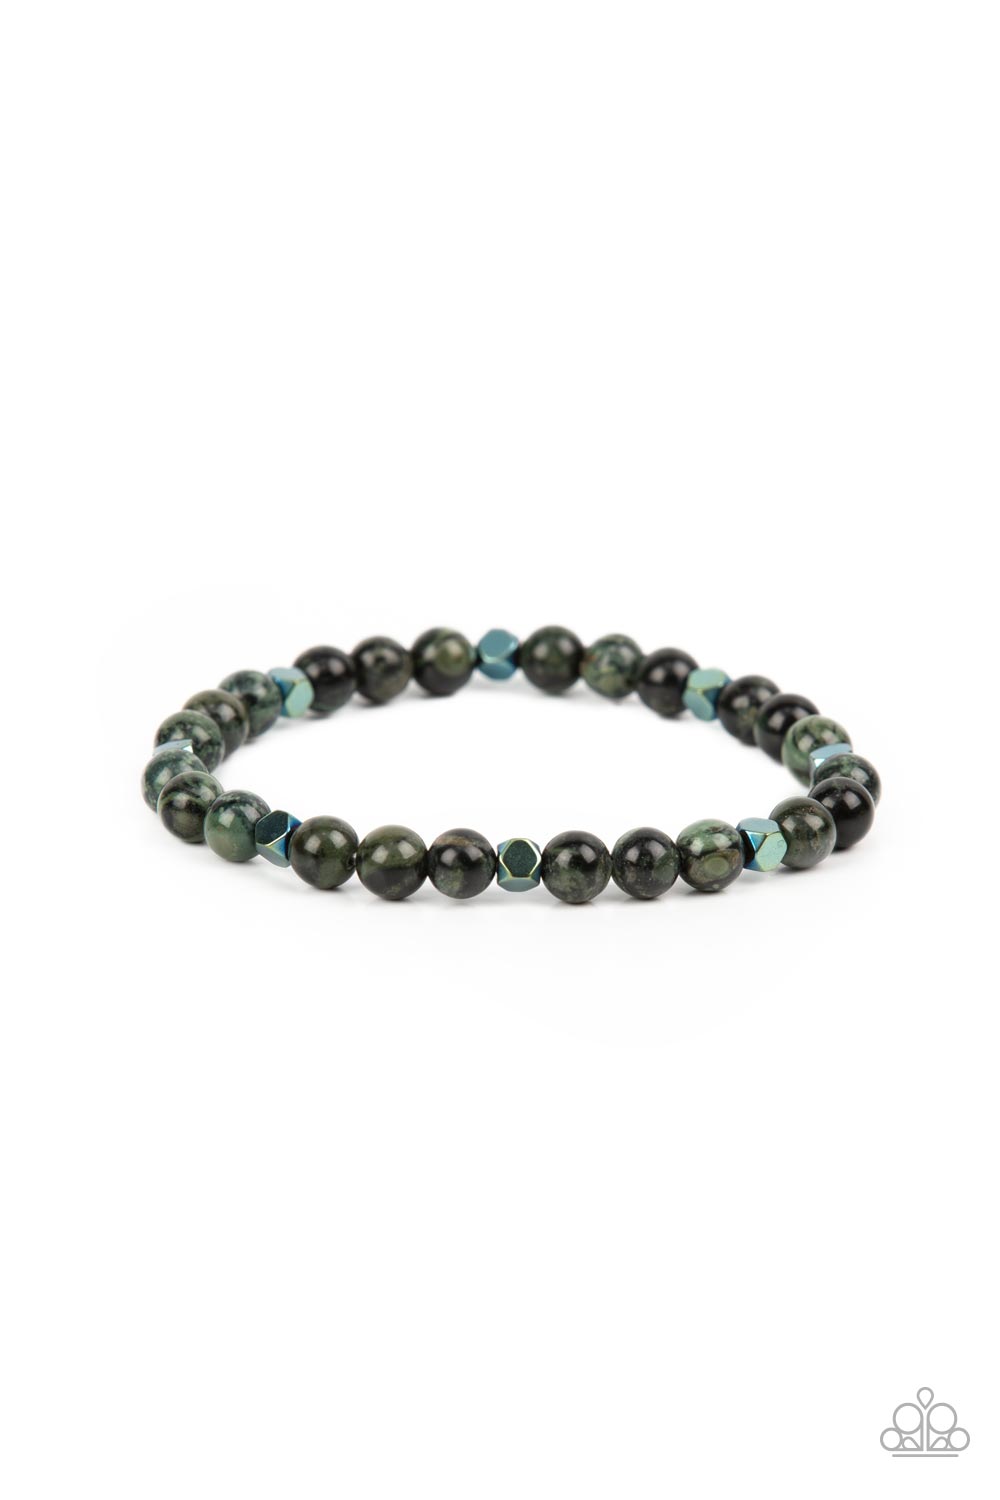 Interstellar Solitude - Green A dainty collection of speckled green stone beads and faceted metallic cube beads are threaded along a stretchy band around the wrist for an earthy flair.  Sold as one individual bracelet.  SKU: P9SE-URGR-176XX